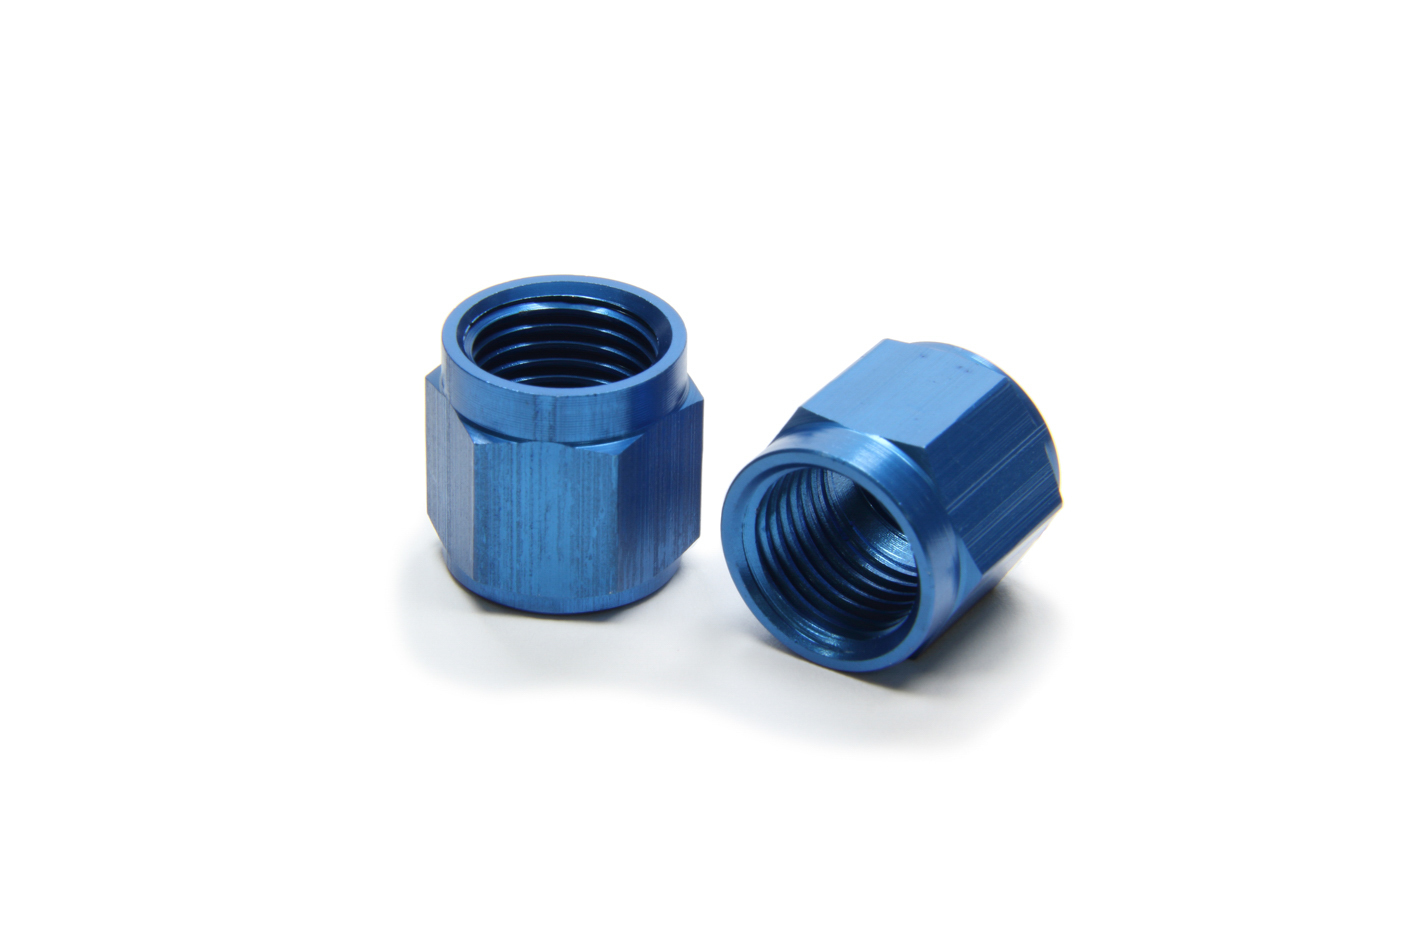 Aeroquip FCM3675 Fitting, Tube Nut, 6 AN, 3/8 in Tube, Aluminum, Blue Anodized, Pair